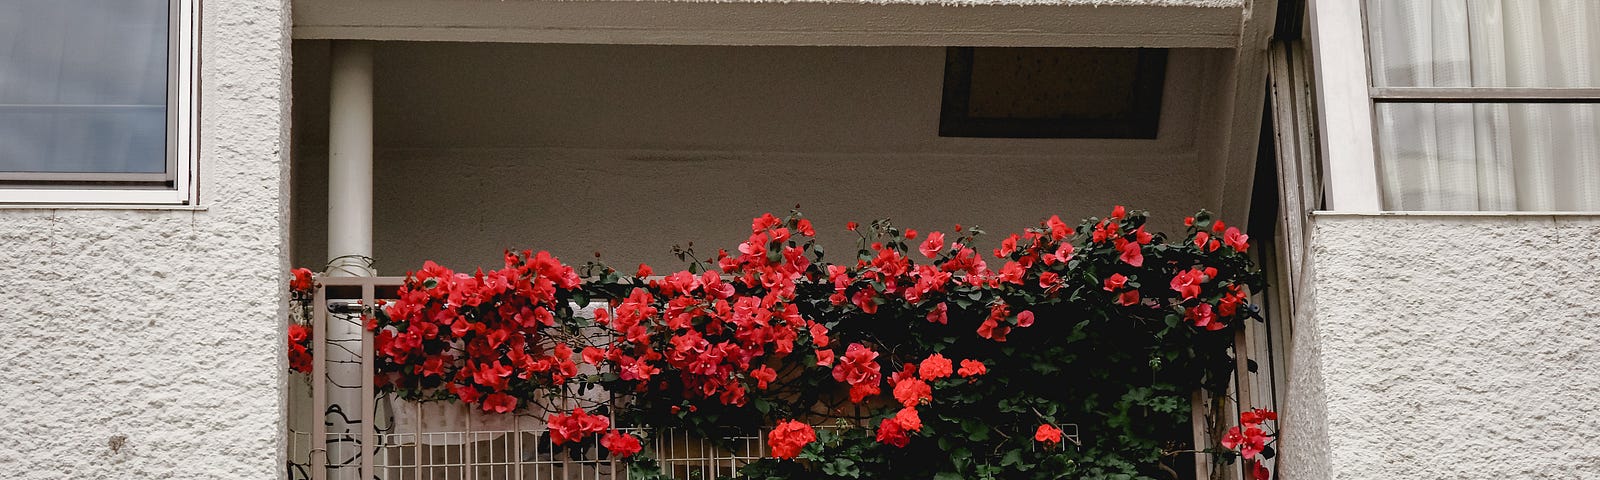 red flowers over a balcony railing